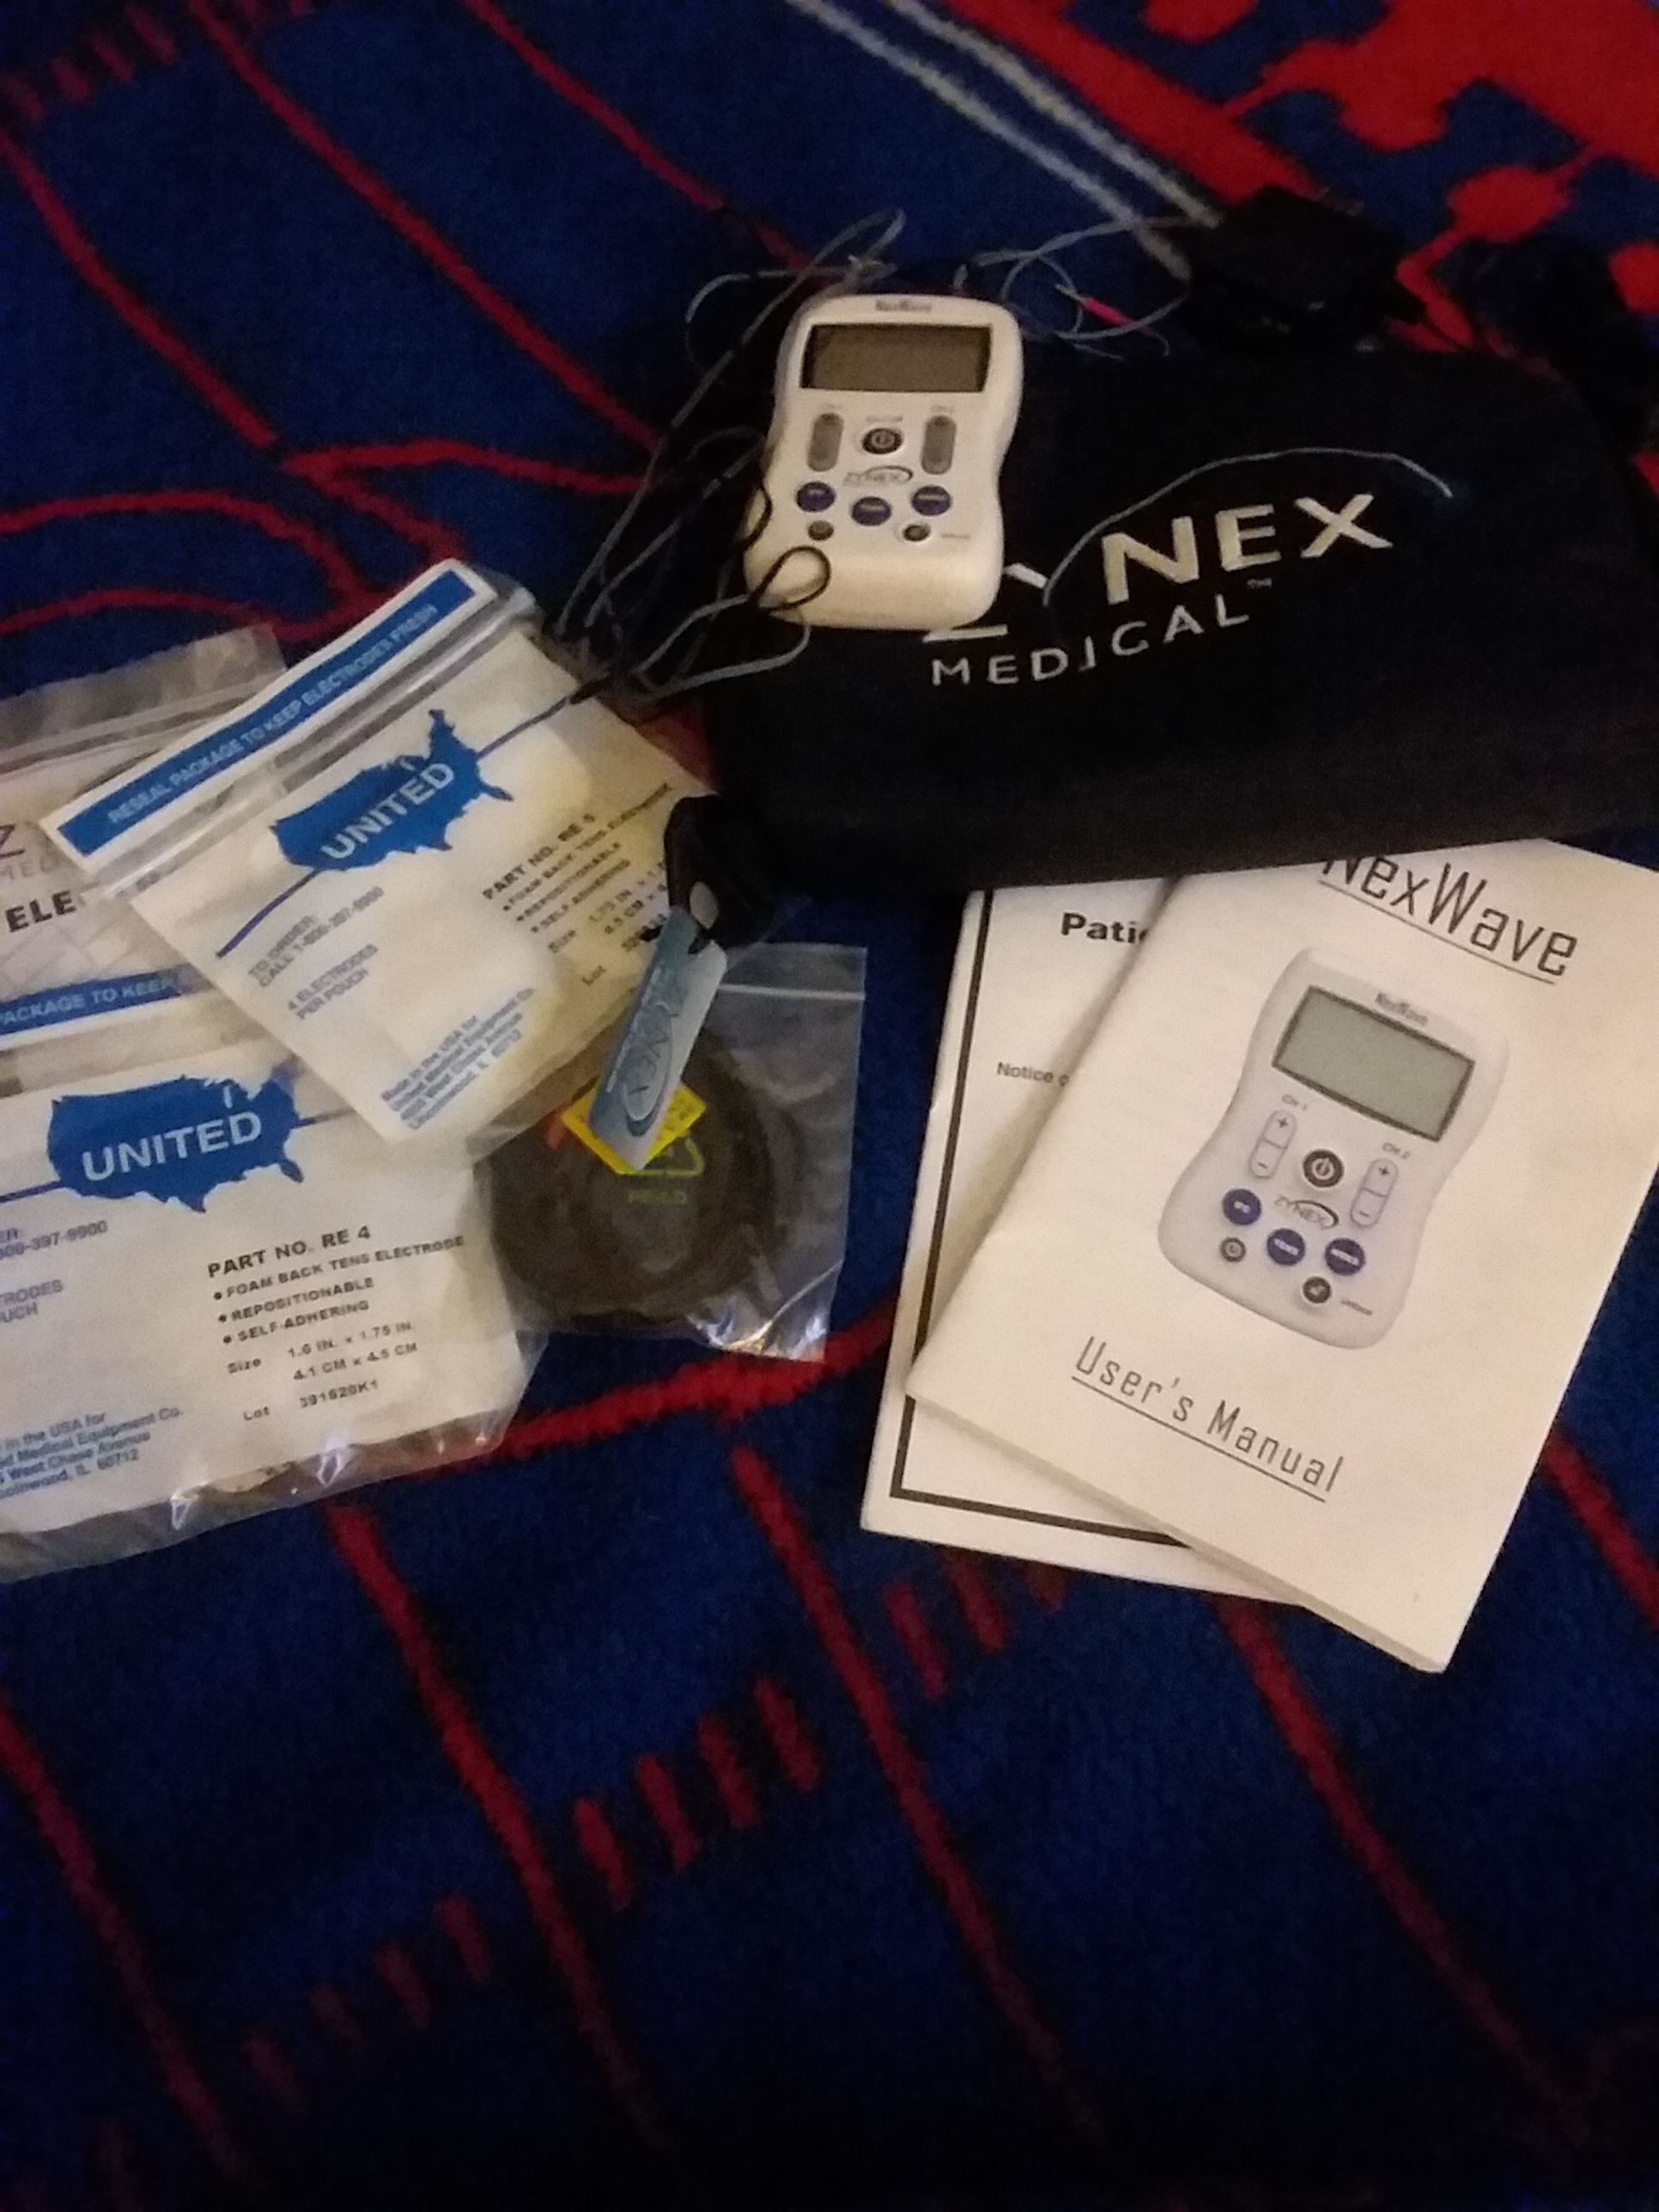 READ* Zynex Medical NexWave TENS IFC NMES Kit Unit With Accessories -  electronics - by owner - sale - craigslist